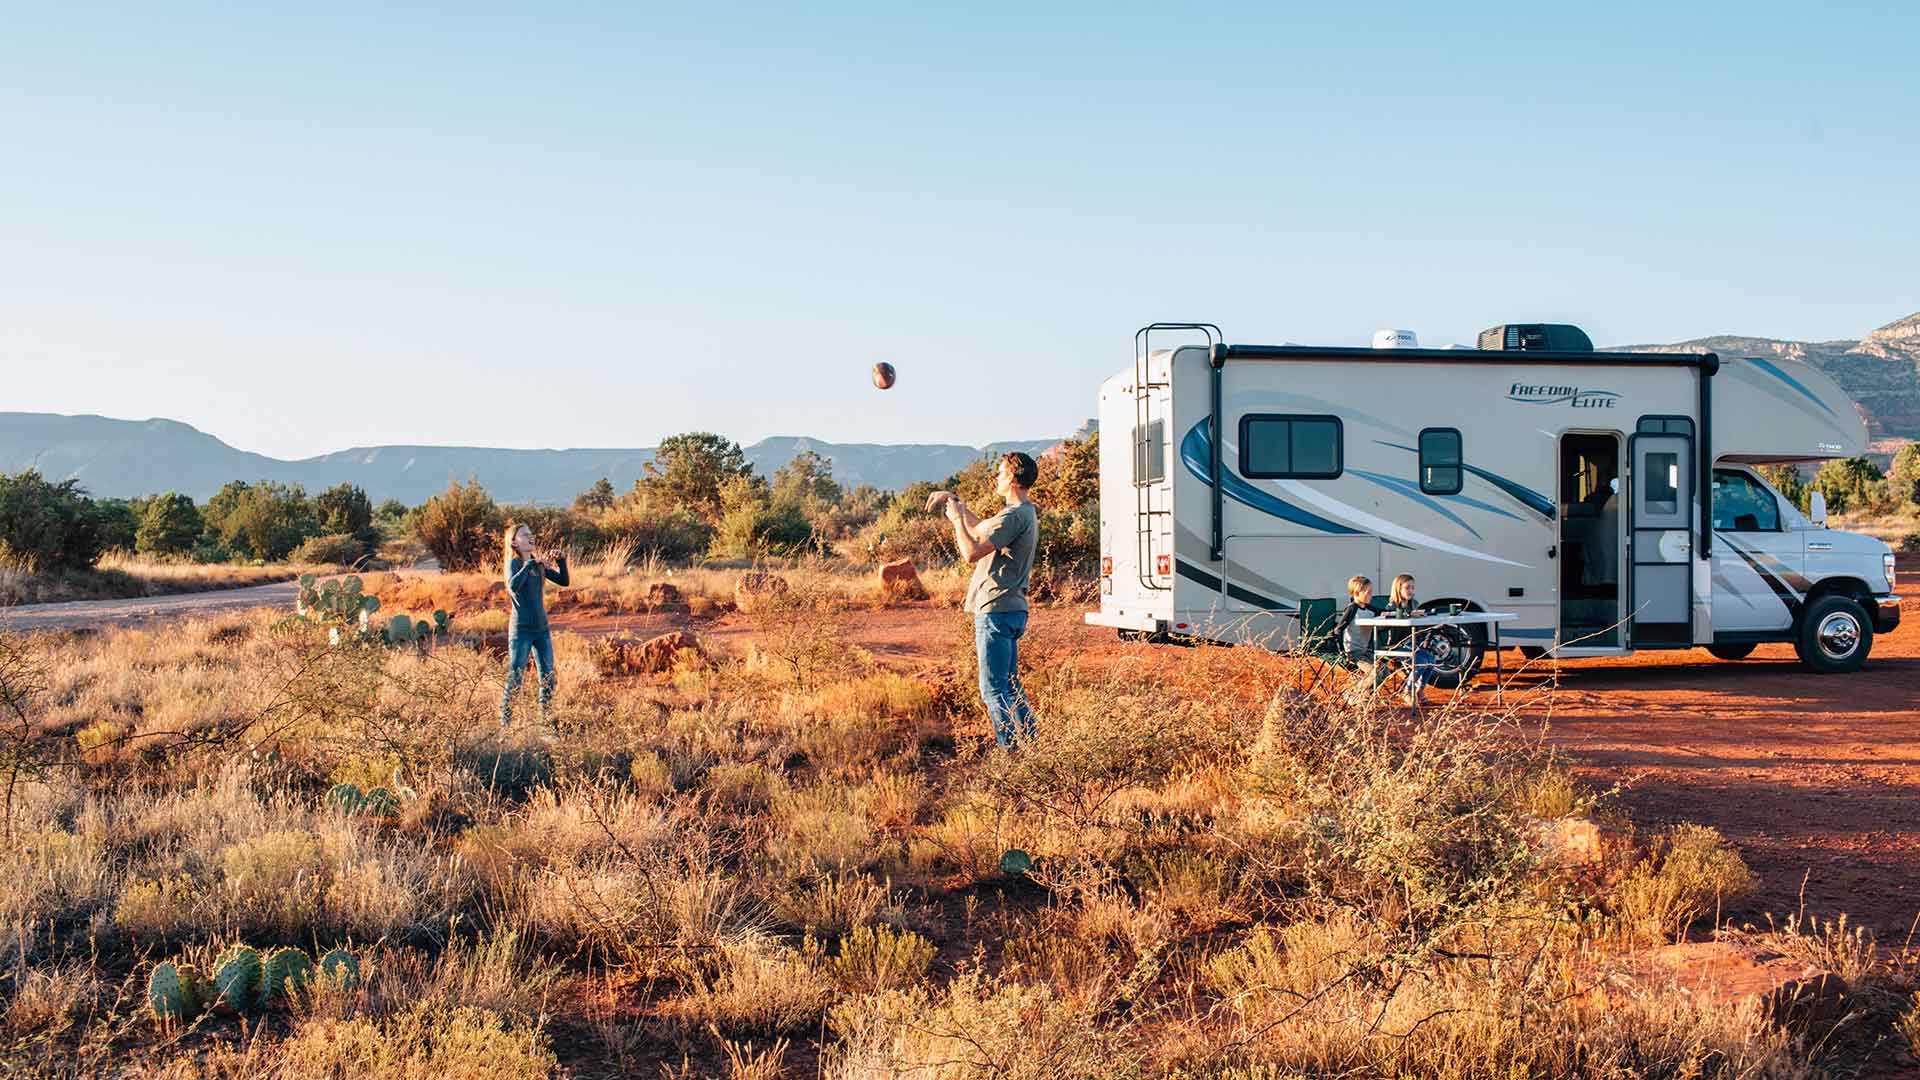 Two people playing near parked RV